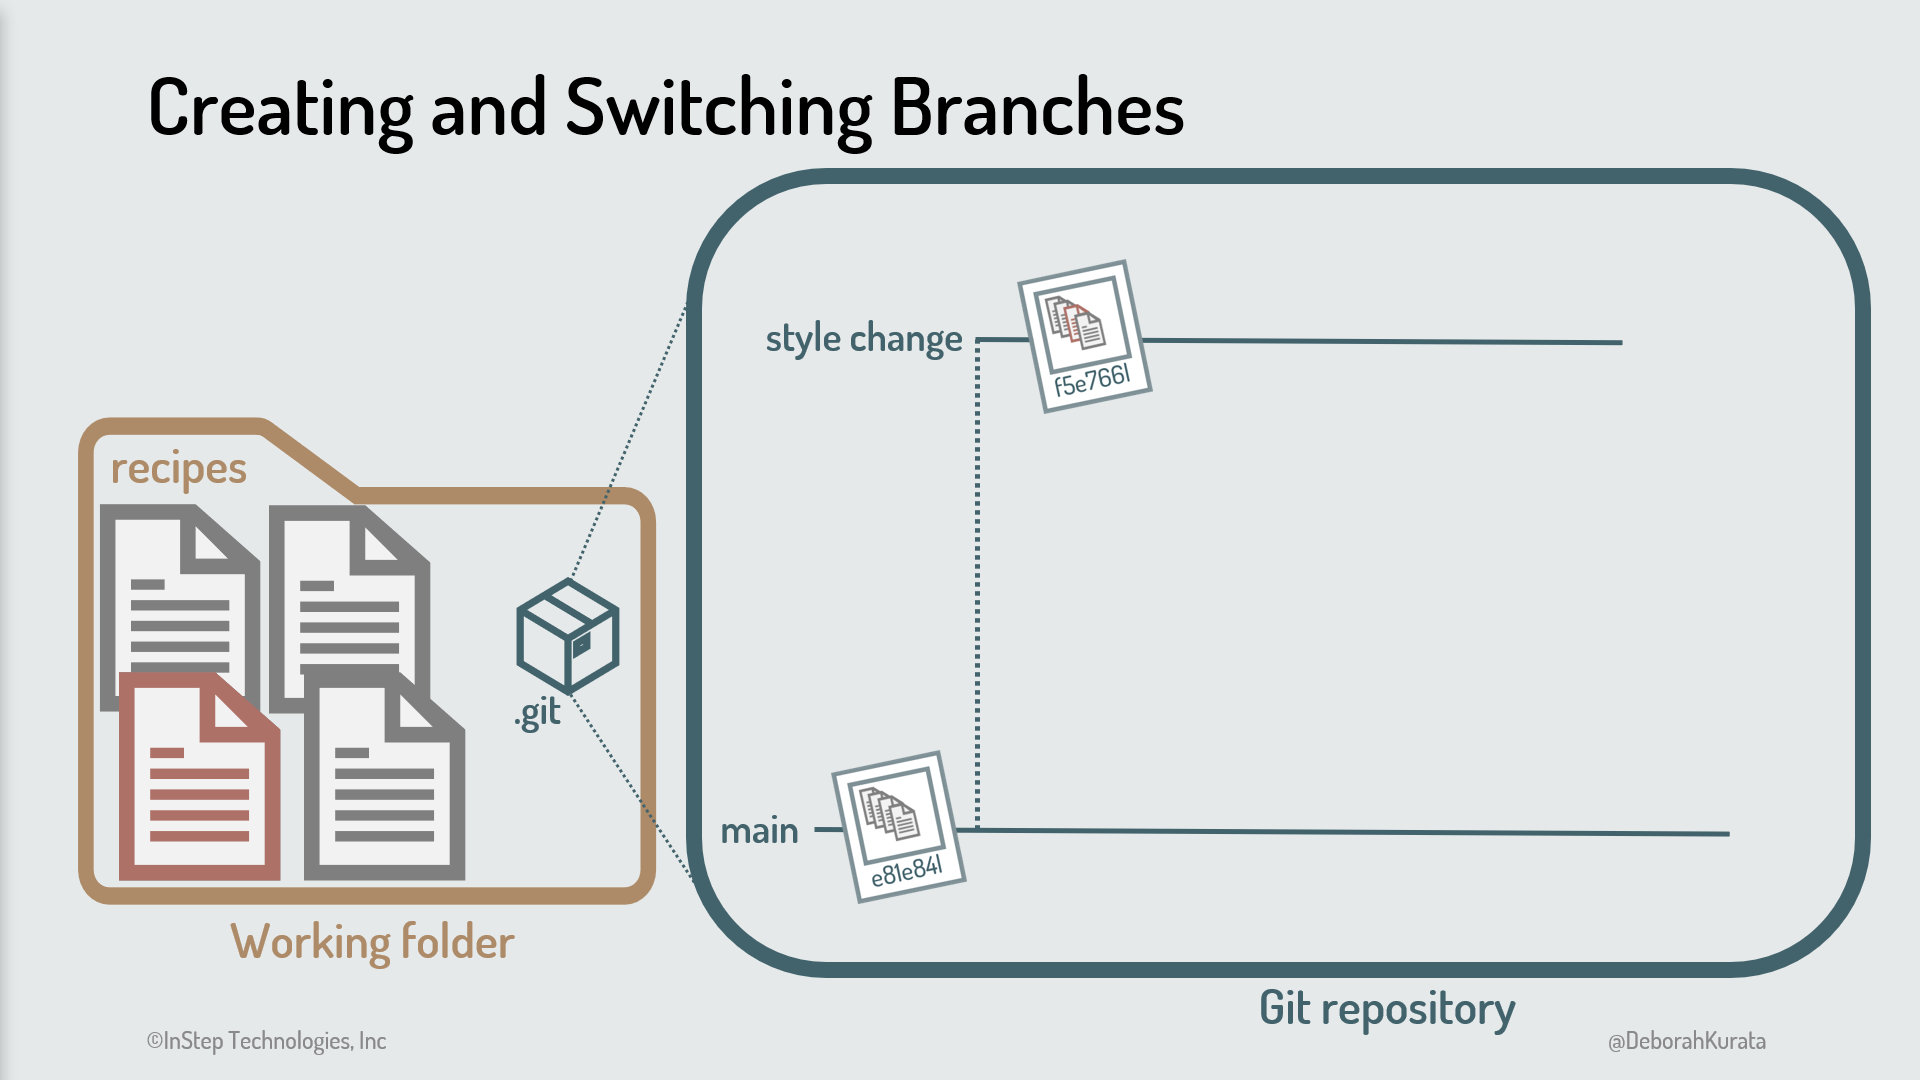 Working folder on the left. Git repository on the right showing the "style change" branch.